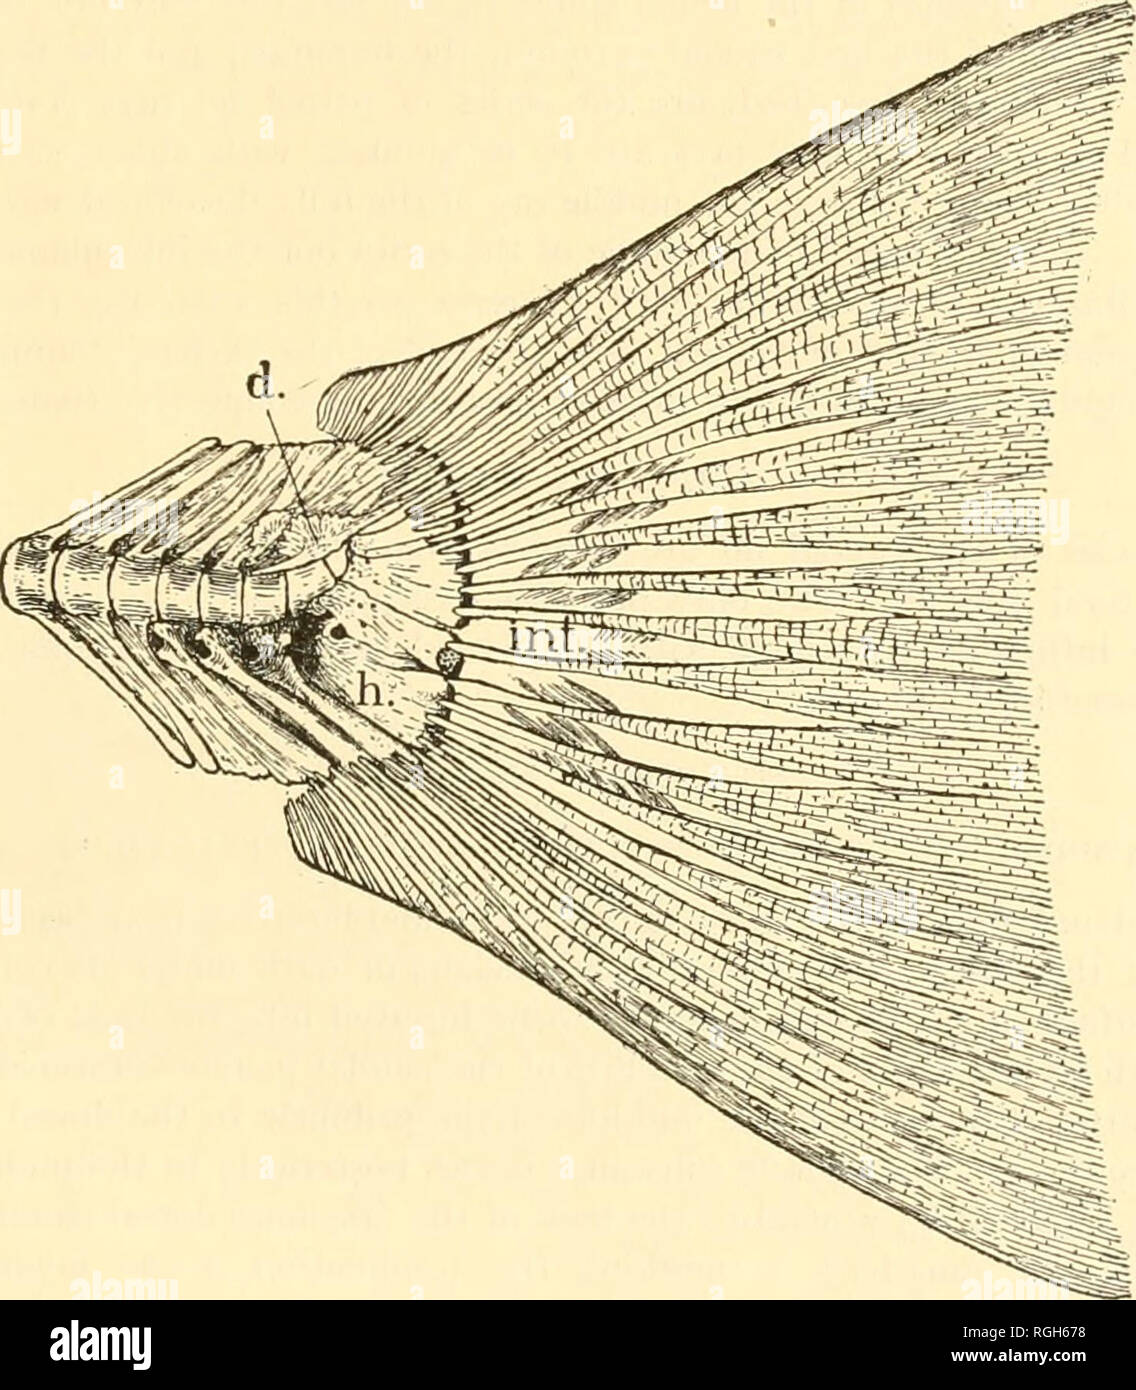 . Bulletin of the Bureau of Fisheries. Fisheries; Fish culture. SKELETAI, MUSCULATURE OP THE KING SALMON. 43 Lying on the dorsal surface of the three centra of the caudal group, and extending out over the bases of the neural spines is an irregularly fan-shaped bony plate, the Deck- knochen der Chorda of von Kolliker.&quot; This plate is coalesced into the dorsal surface of the second, and usually the third, centrum. It has a caudally projecting spine extend- ing in the direction of the axis of the third centrum. The hemal spines of the last three vertebrae of the peduncle are also sharply modi Stock Photo